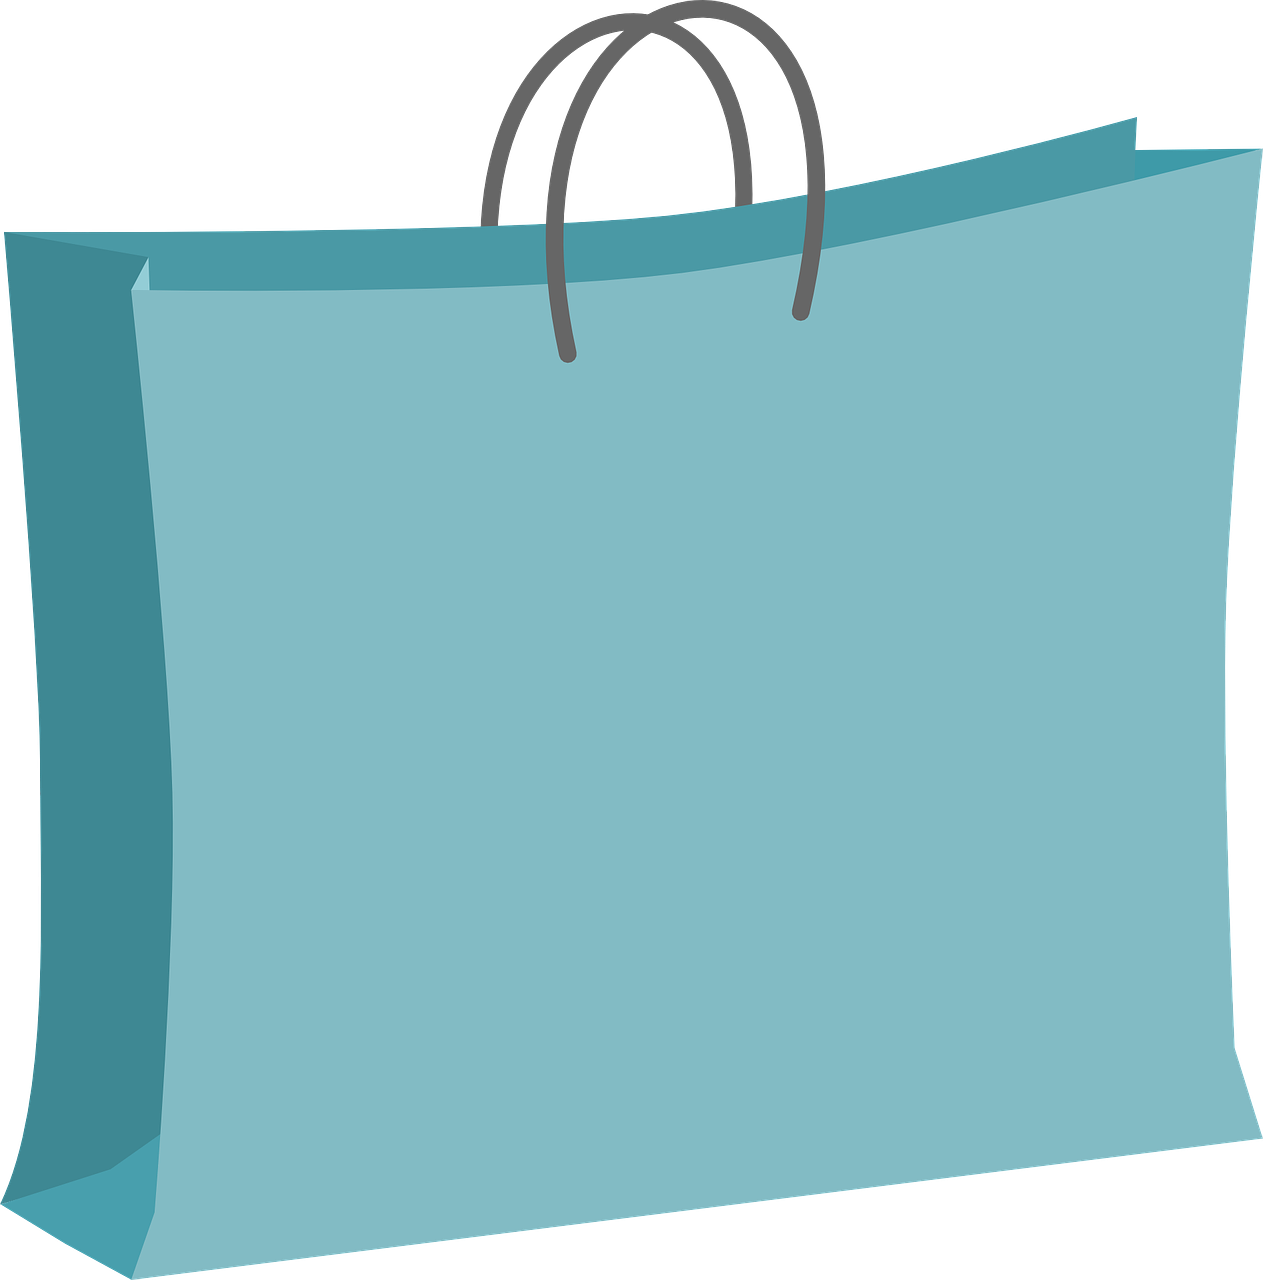 Shopping bags free to use clipart